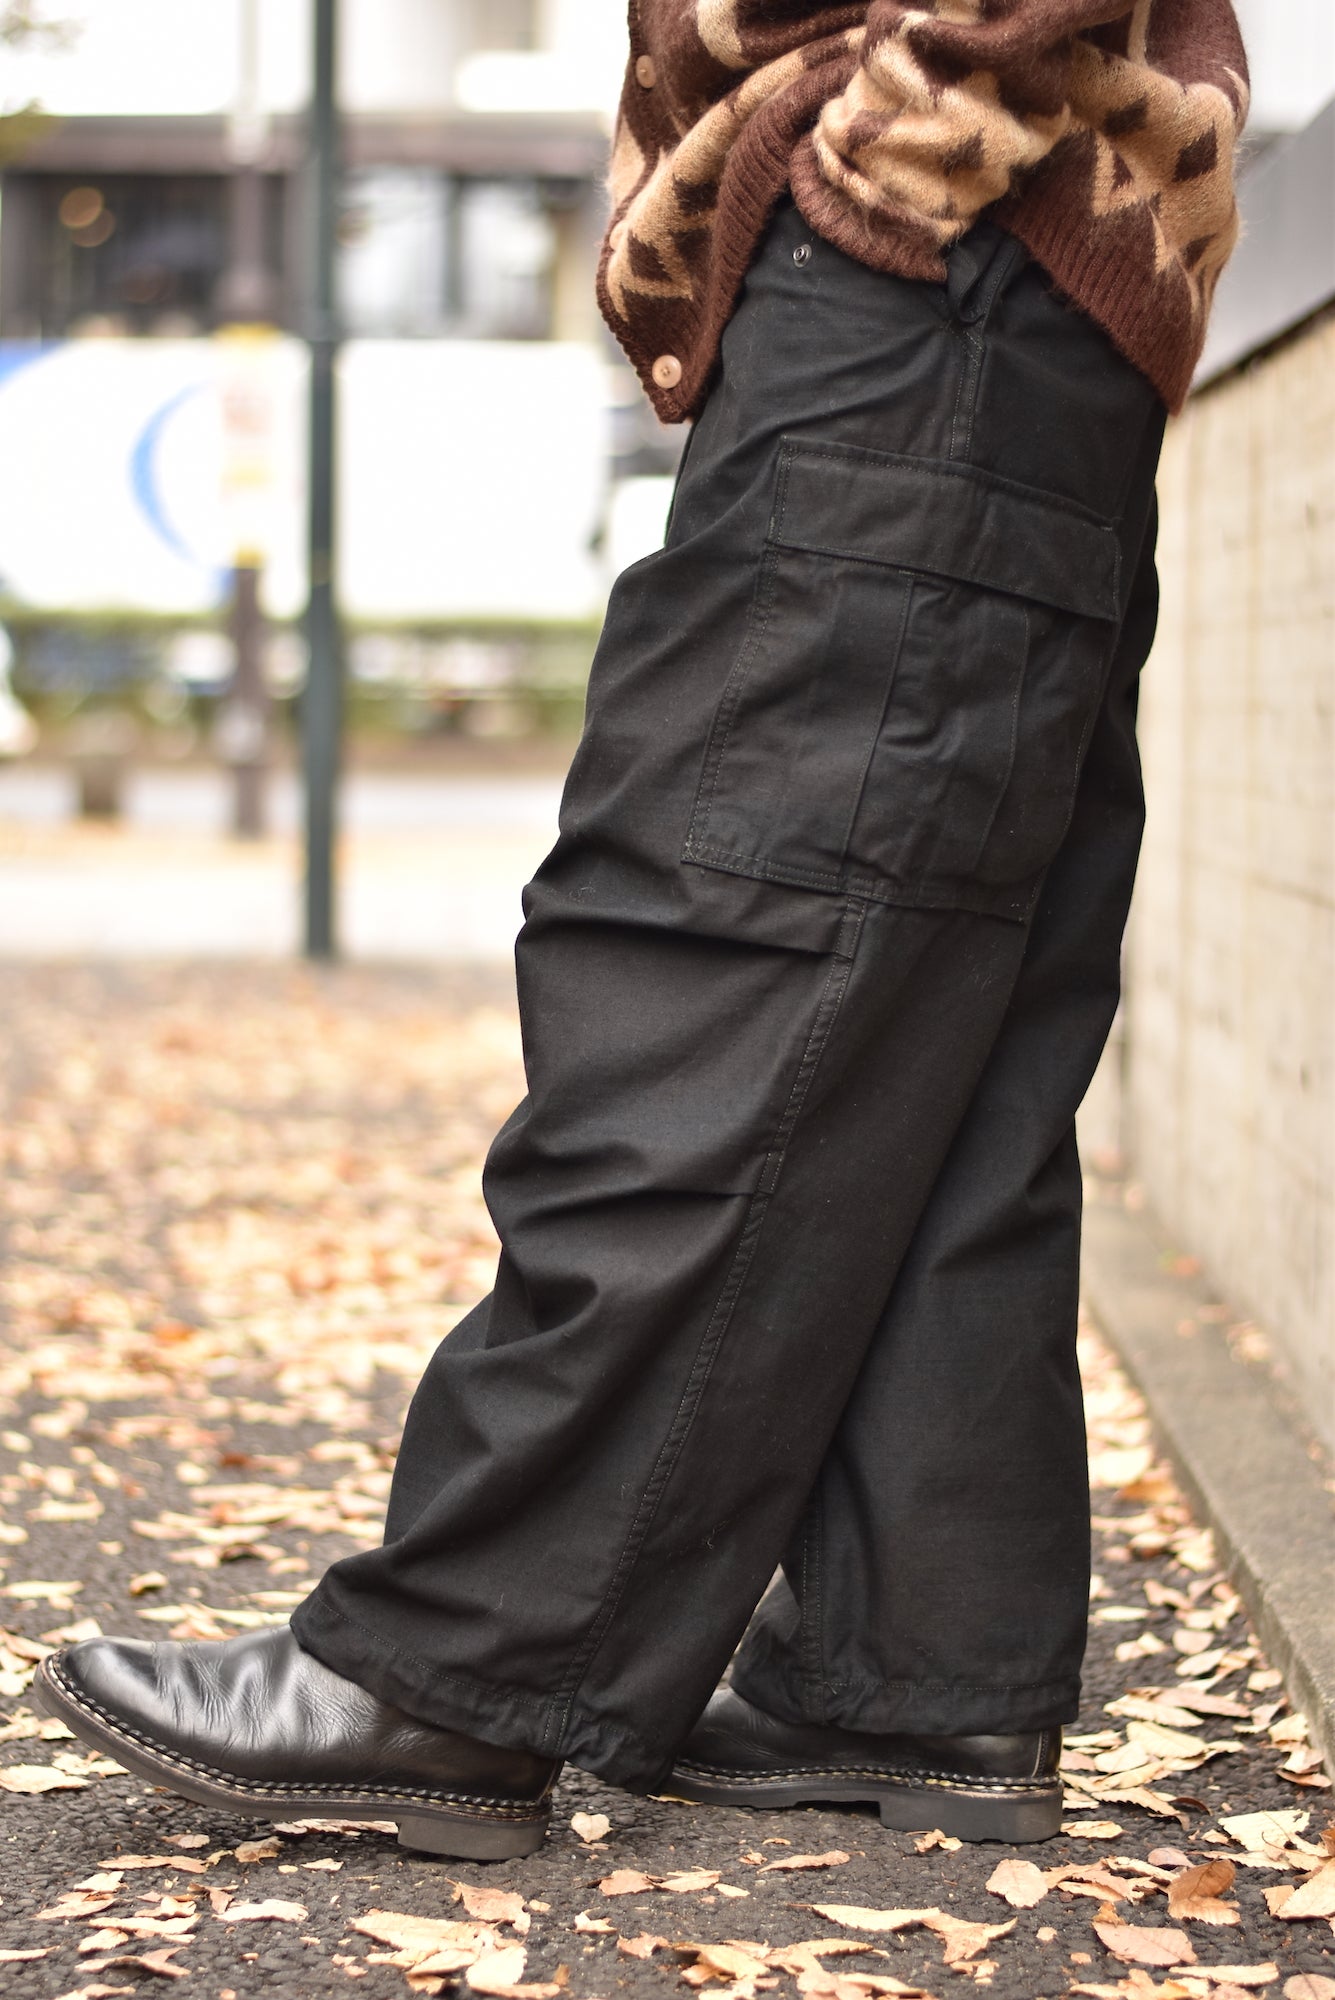 DEAD STOCK】M65 MILITARY PANTS OVER DYED | スマクロ原宿店の 